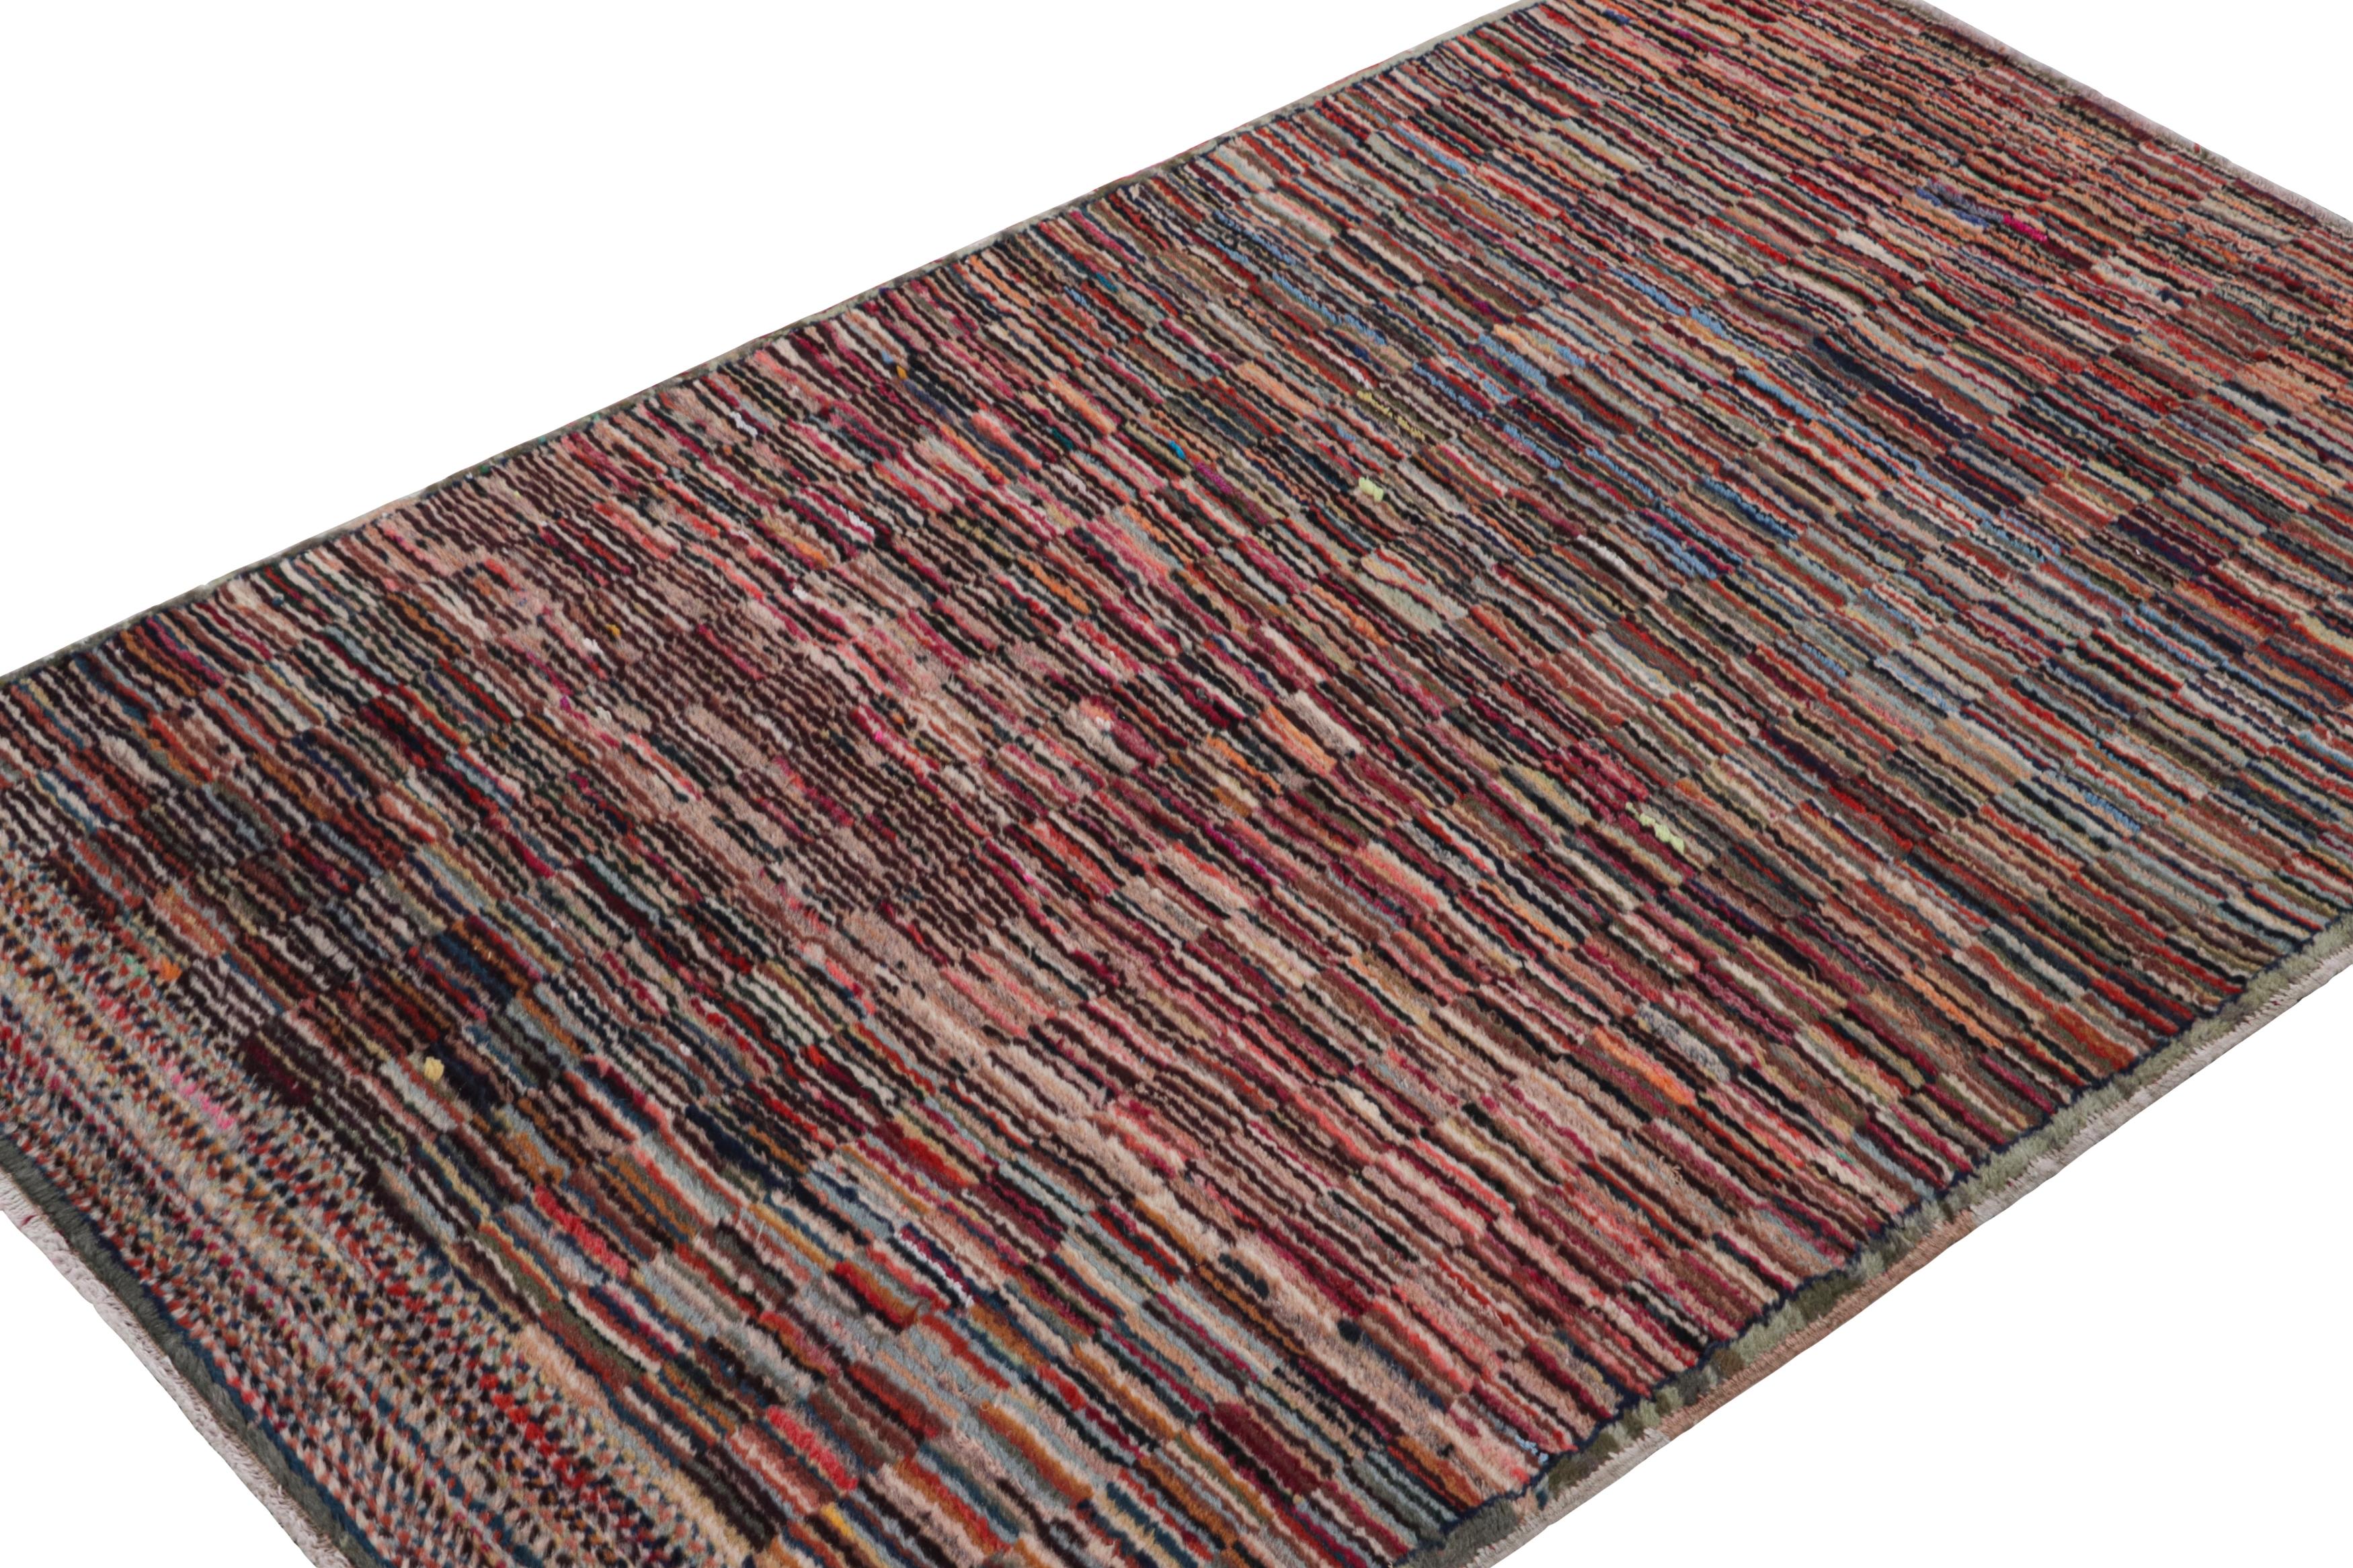 Hand-knotted in wool, circa 1960 - 1970, this 3x5 vintage Polychromatic Deco rug is an exciting new addition to Rug & Kilim Mid-century Pasha Collection. This design is a Müren masterpiece for its whimsical look and good condition.

On the design: